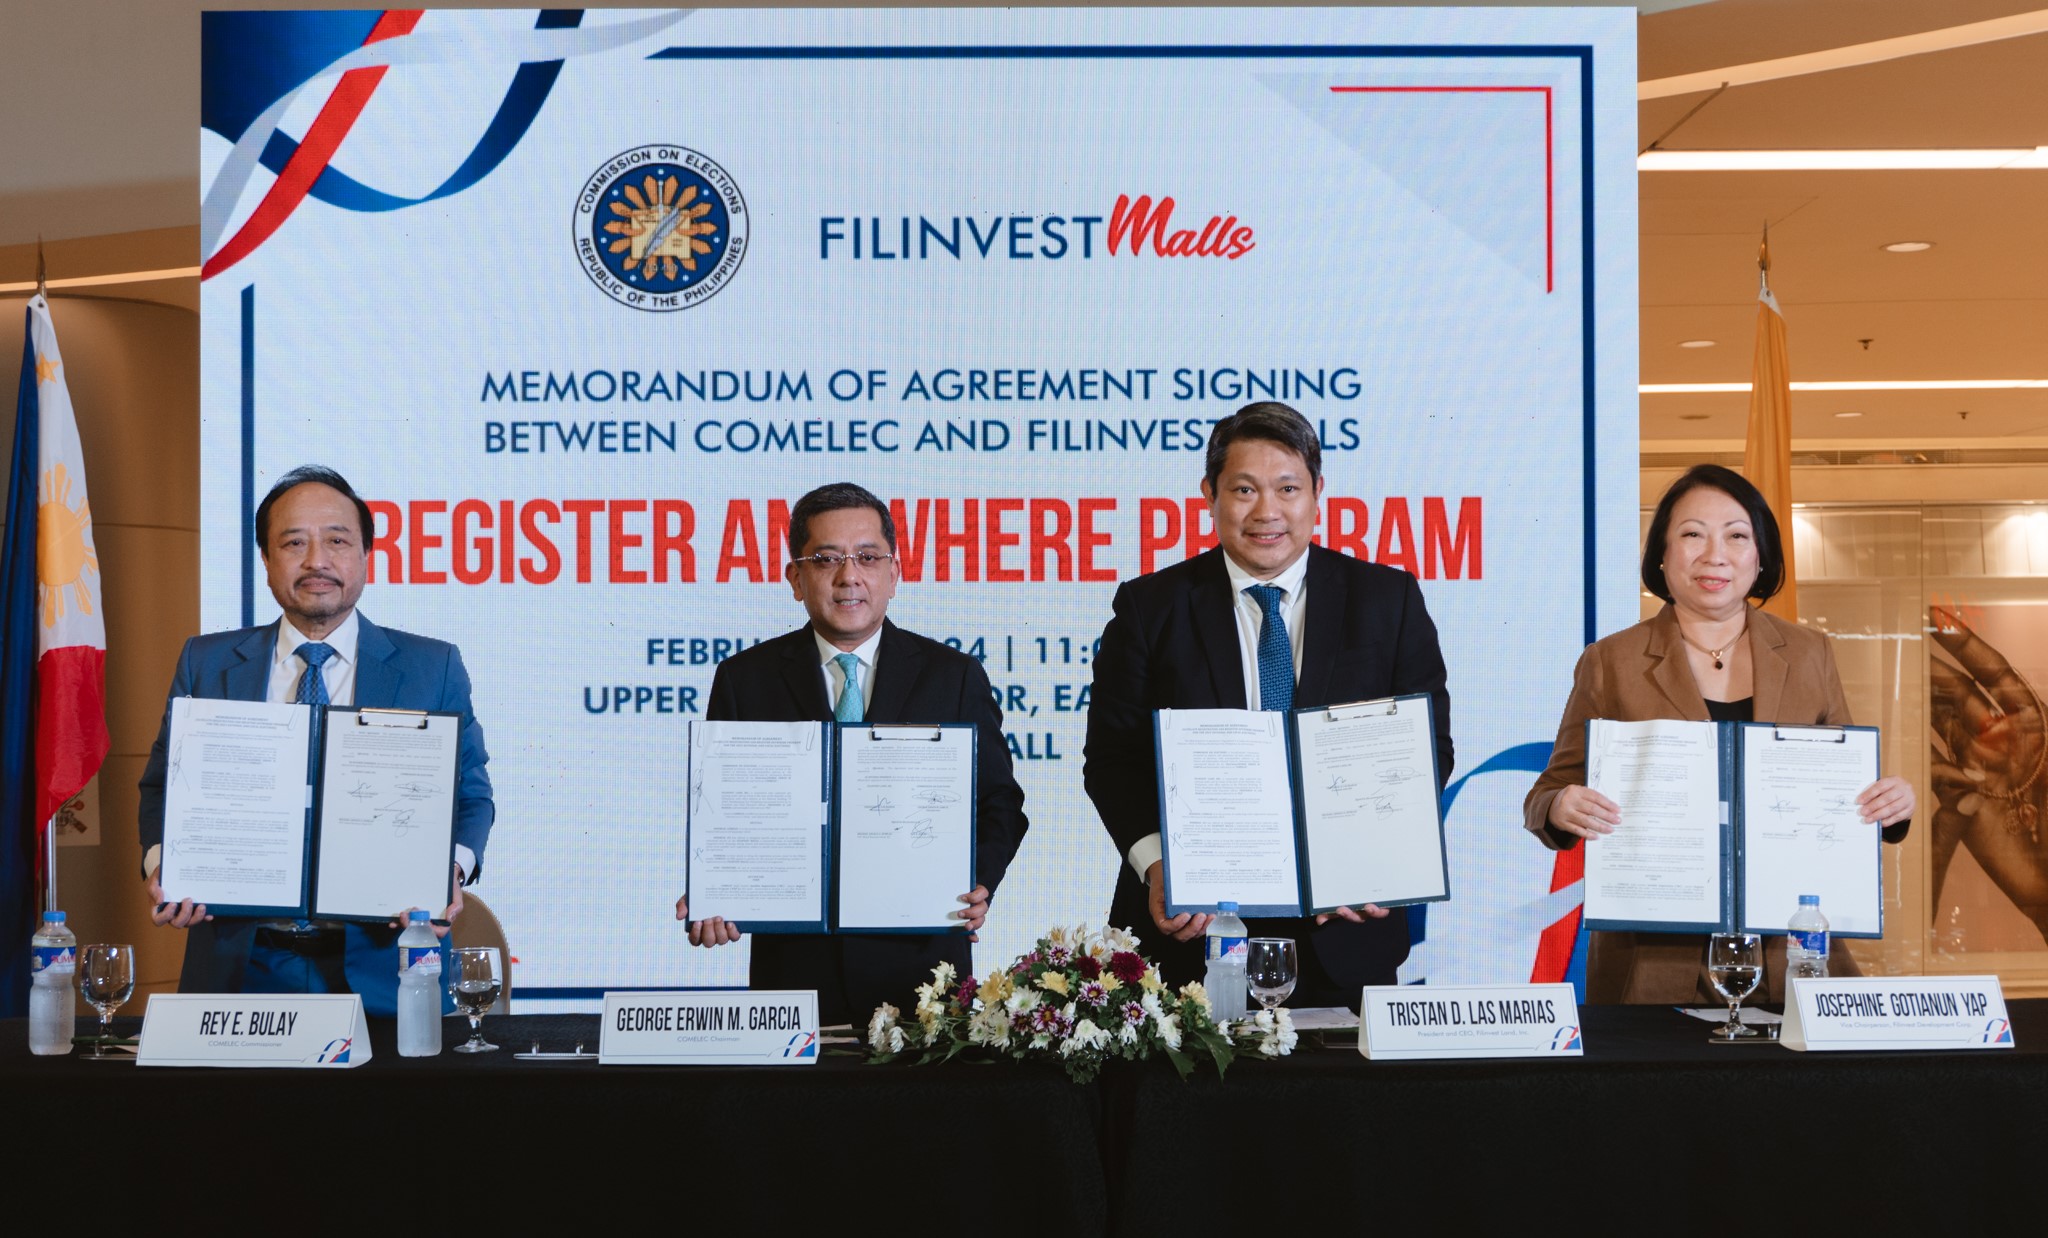 Filinvest Malls and COMELEC Launch Register Anywhere Program